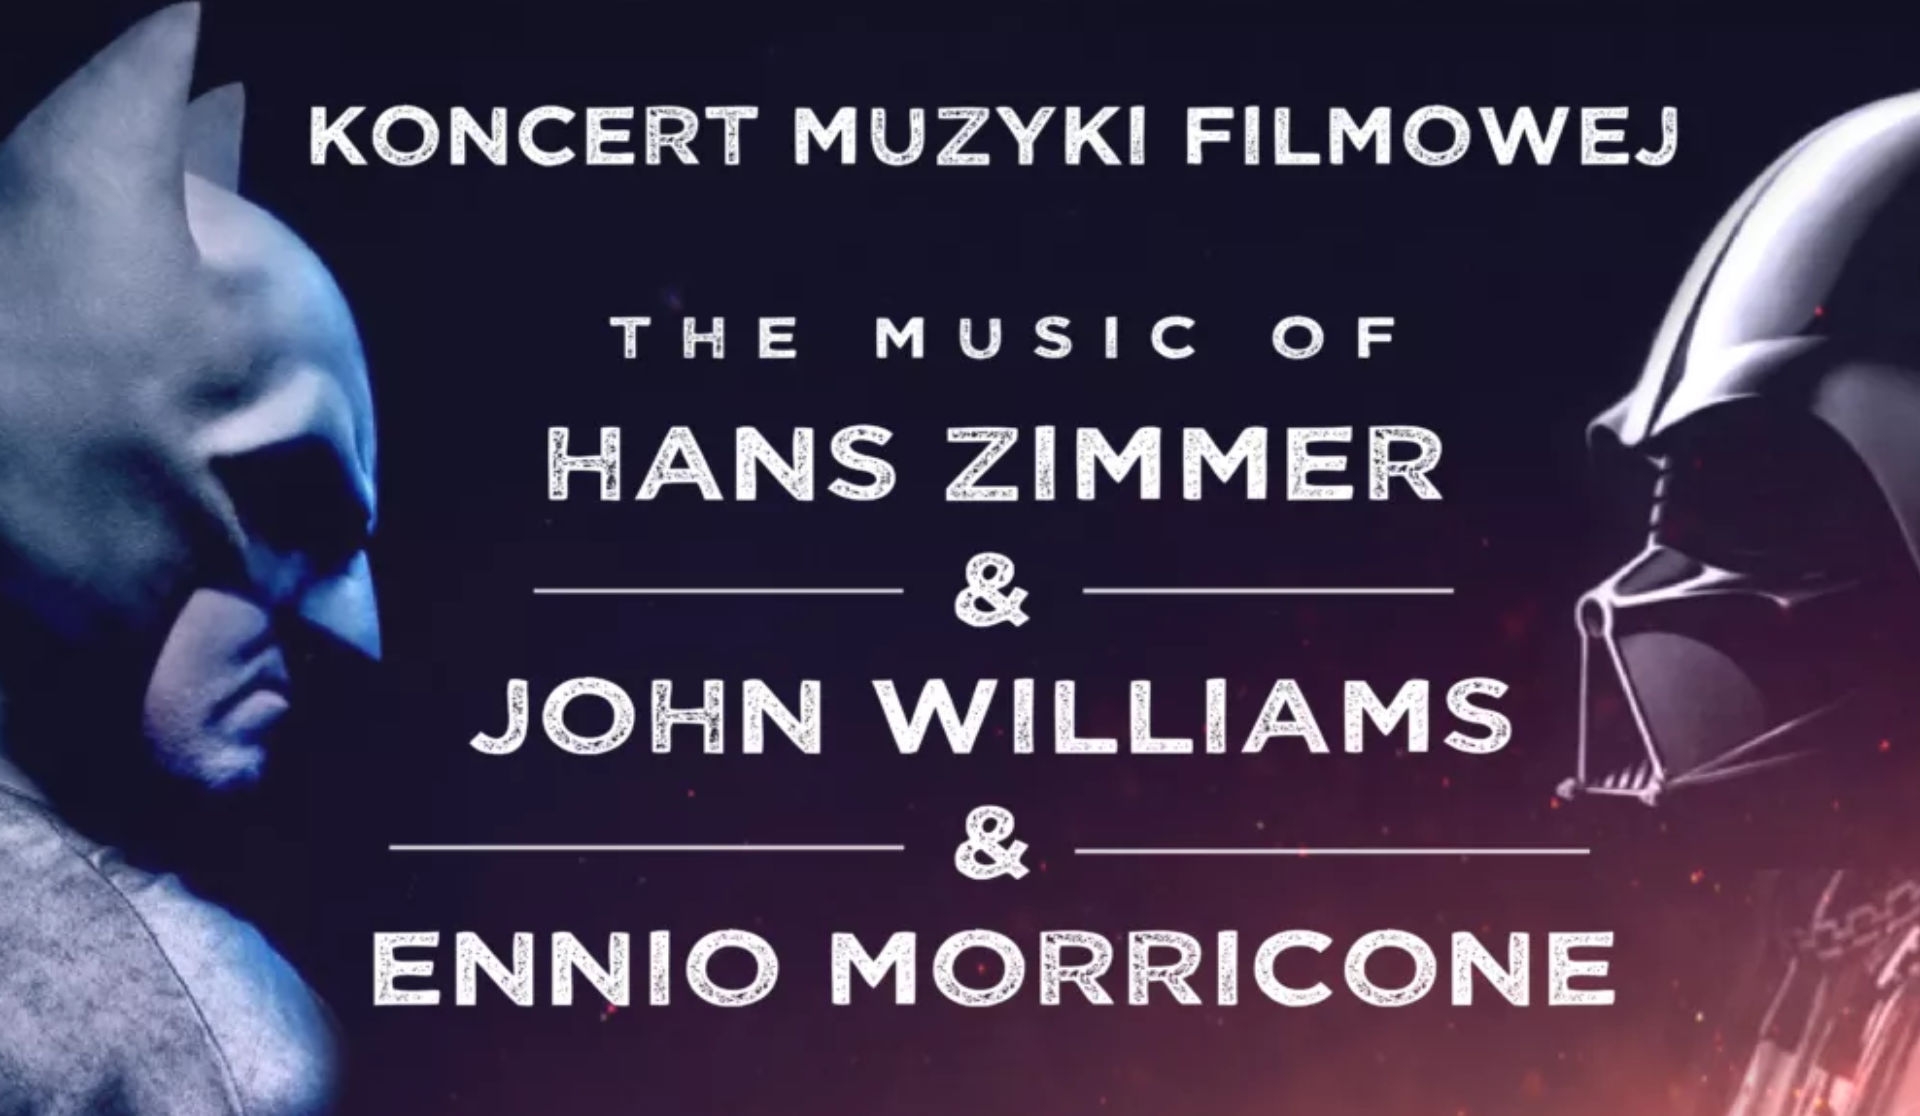 04.10.2022 – The music of Hans Zimmer &amp; John Williams, and Ennio Moriccone